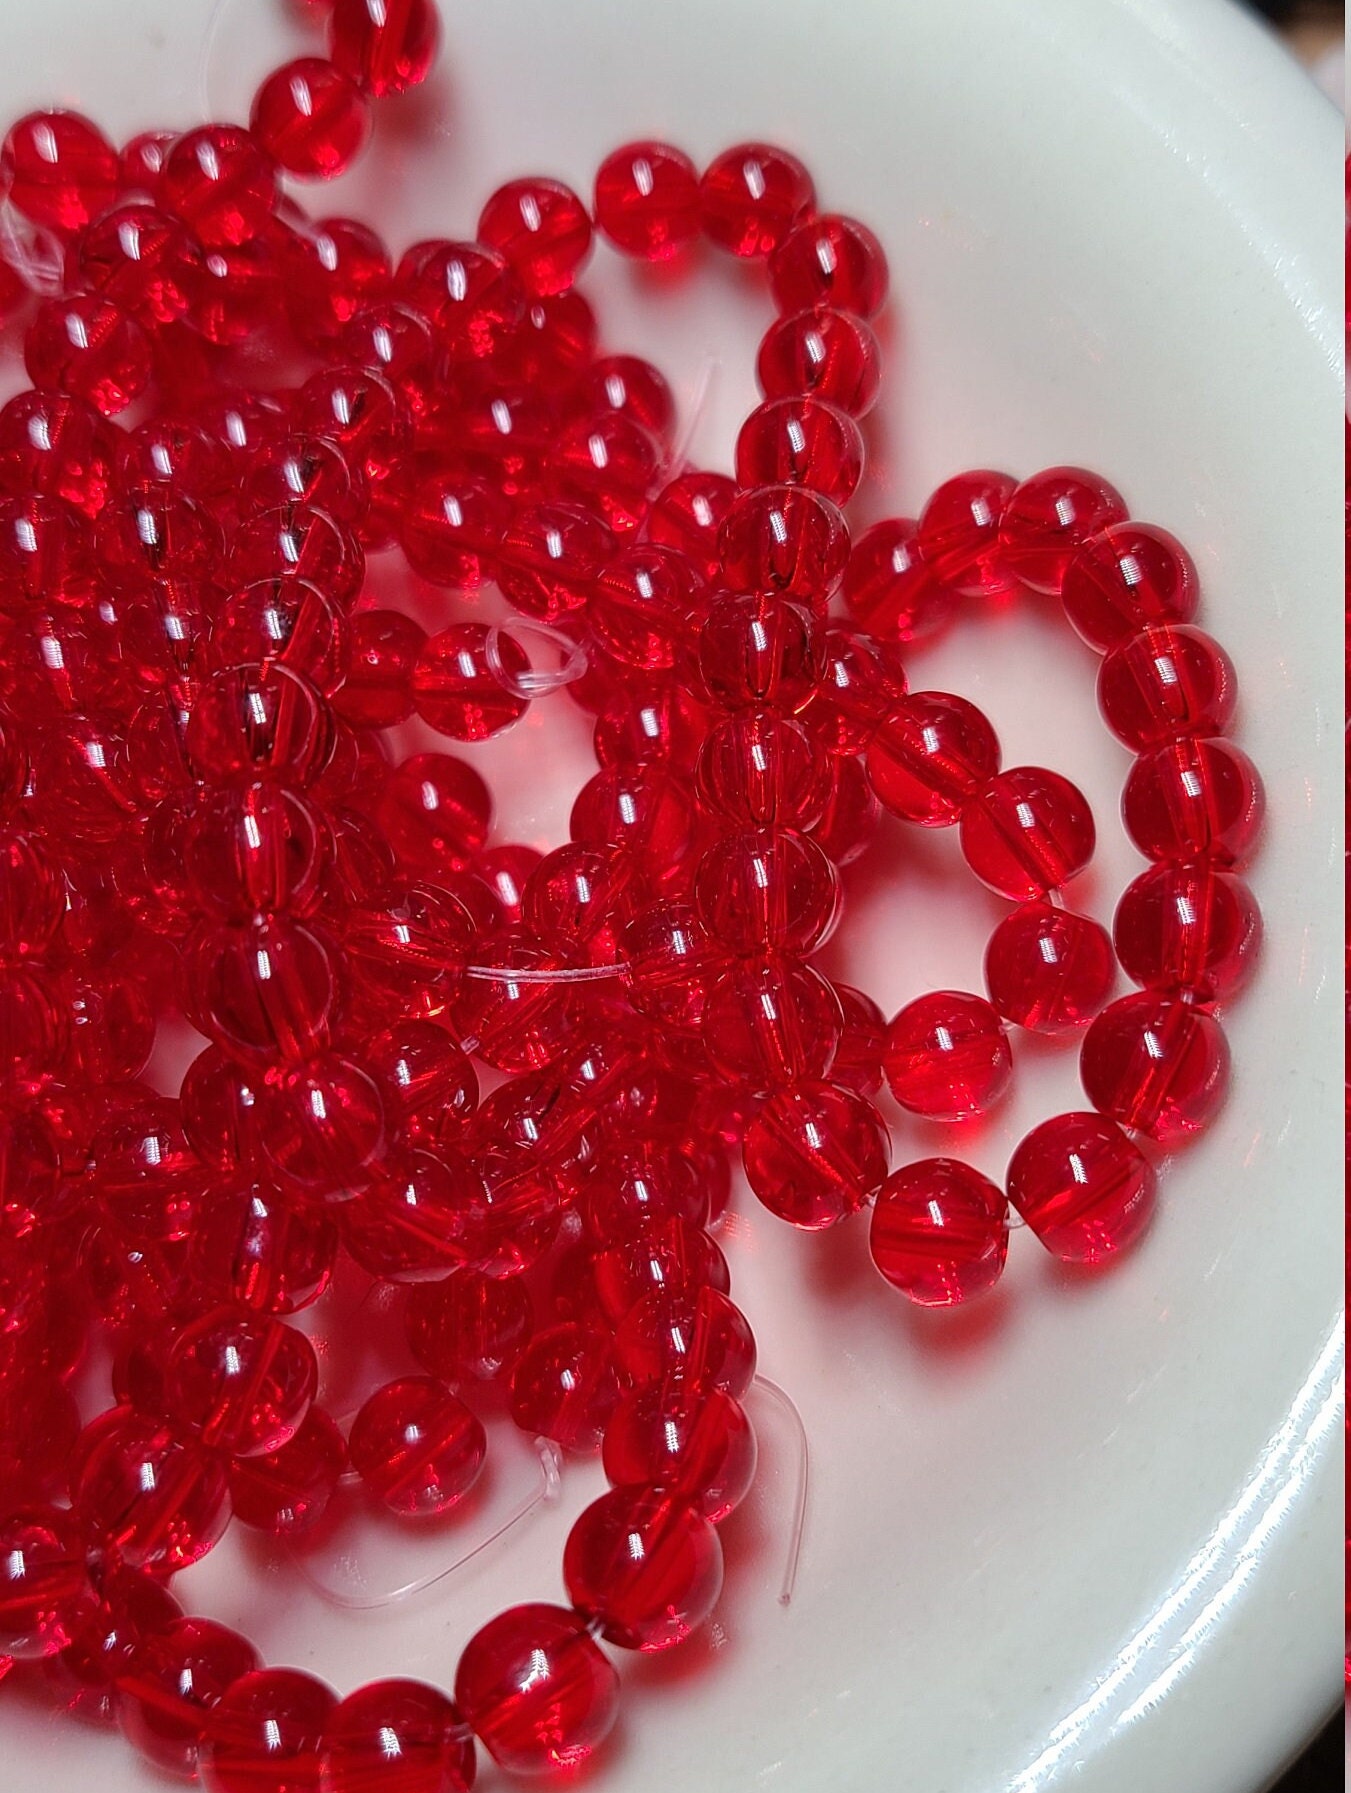 Red Glass Beads, 15 Loose Vintage Red Beads, Rich Red Glass Beads, Jewelry  Making Supplies, Craft Supplies, Destash Bead G53 